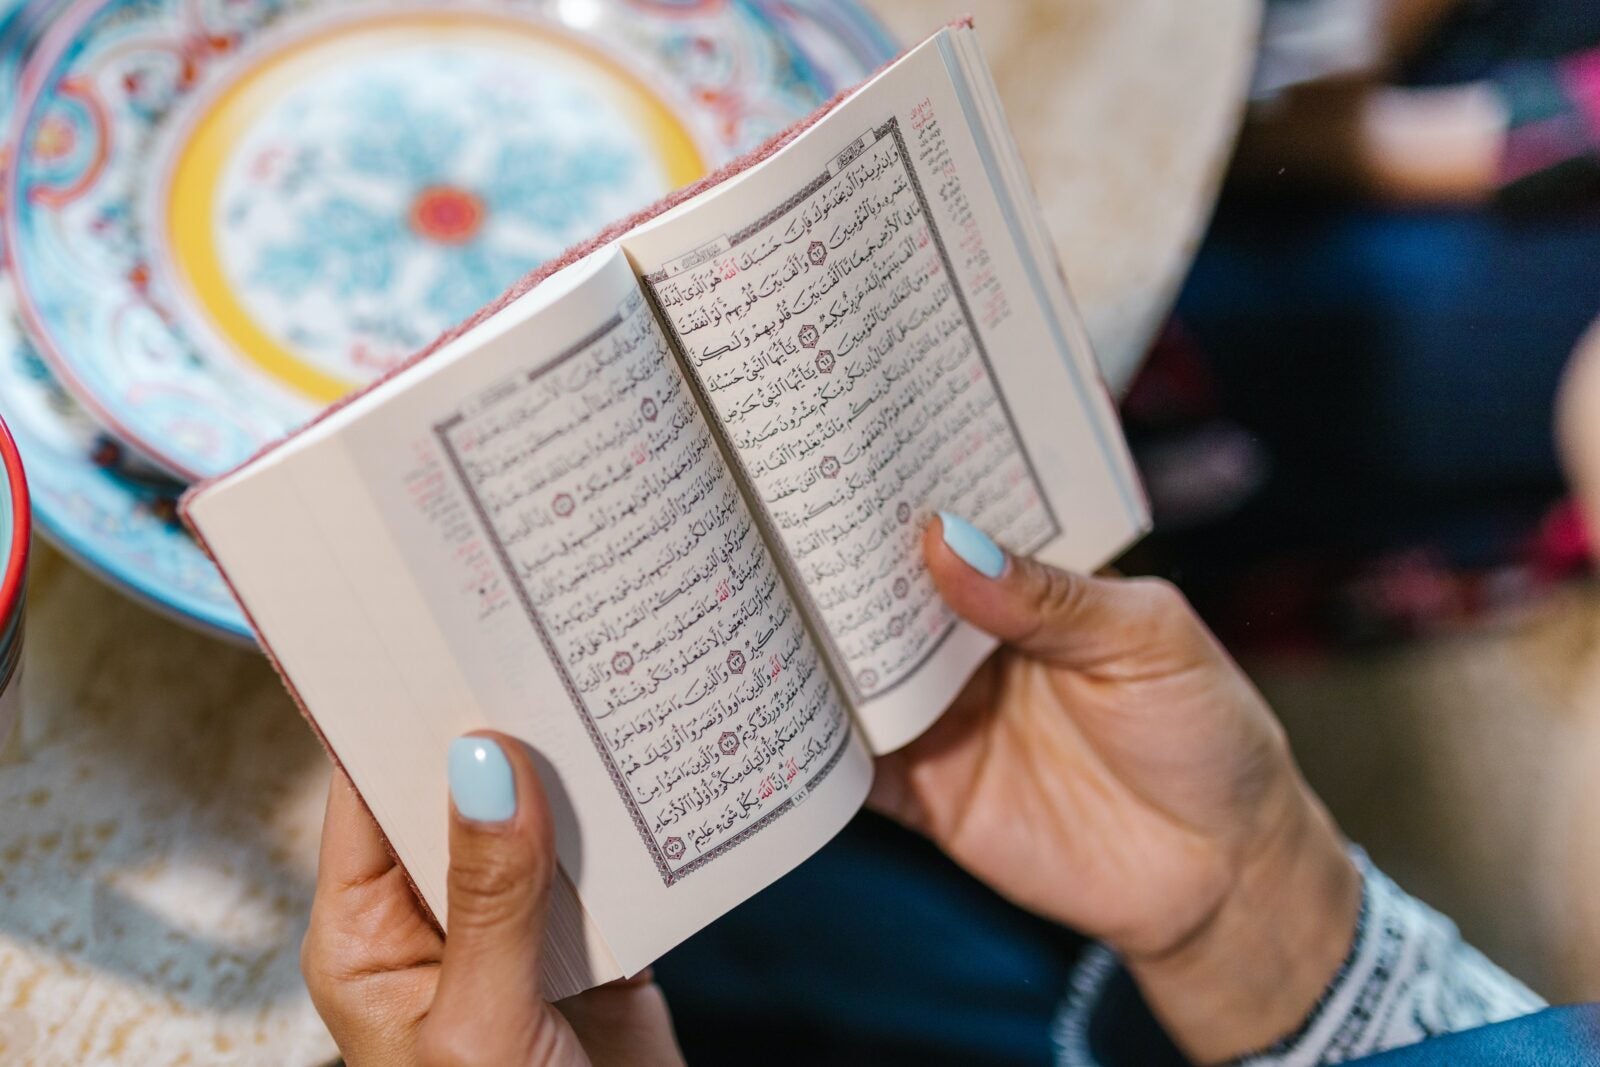 Close up of a woman's hand with blue painted nails holding a religious book.